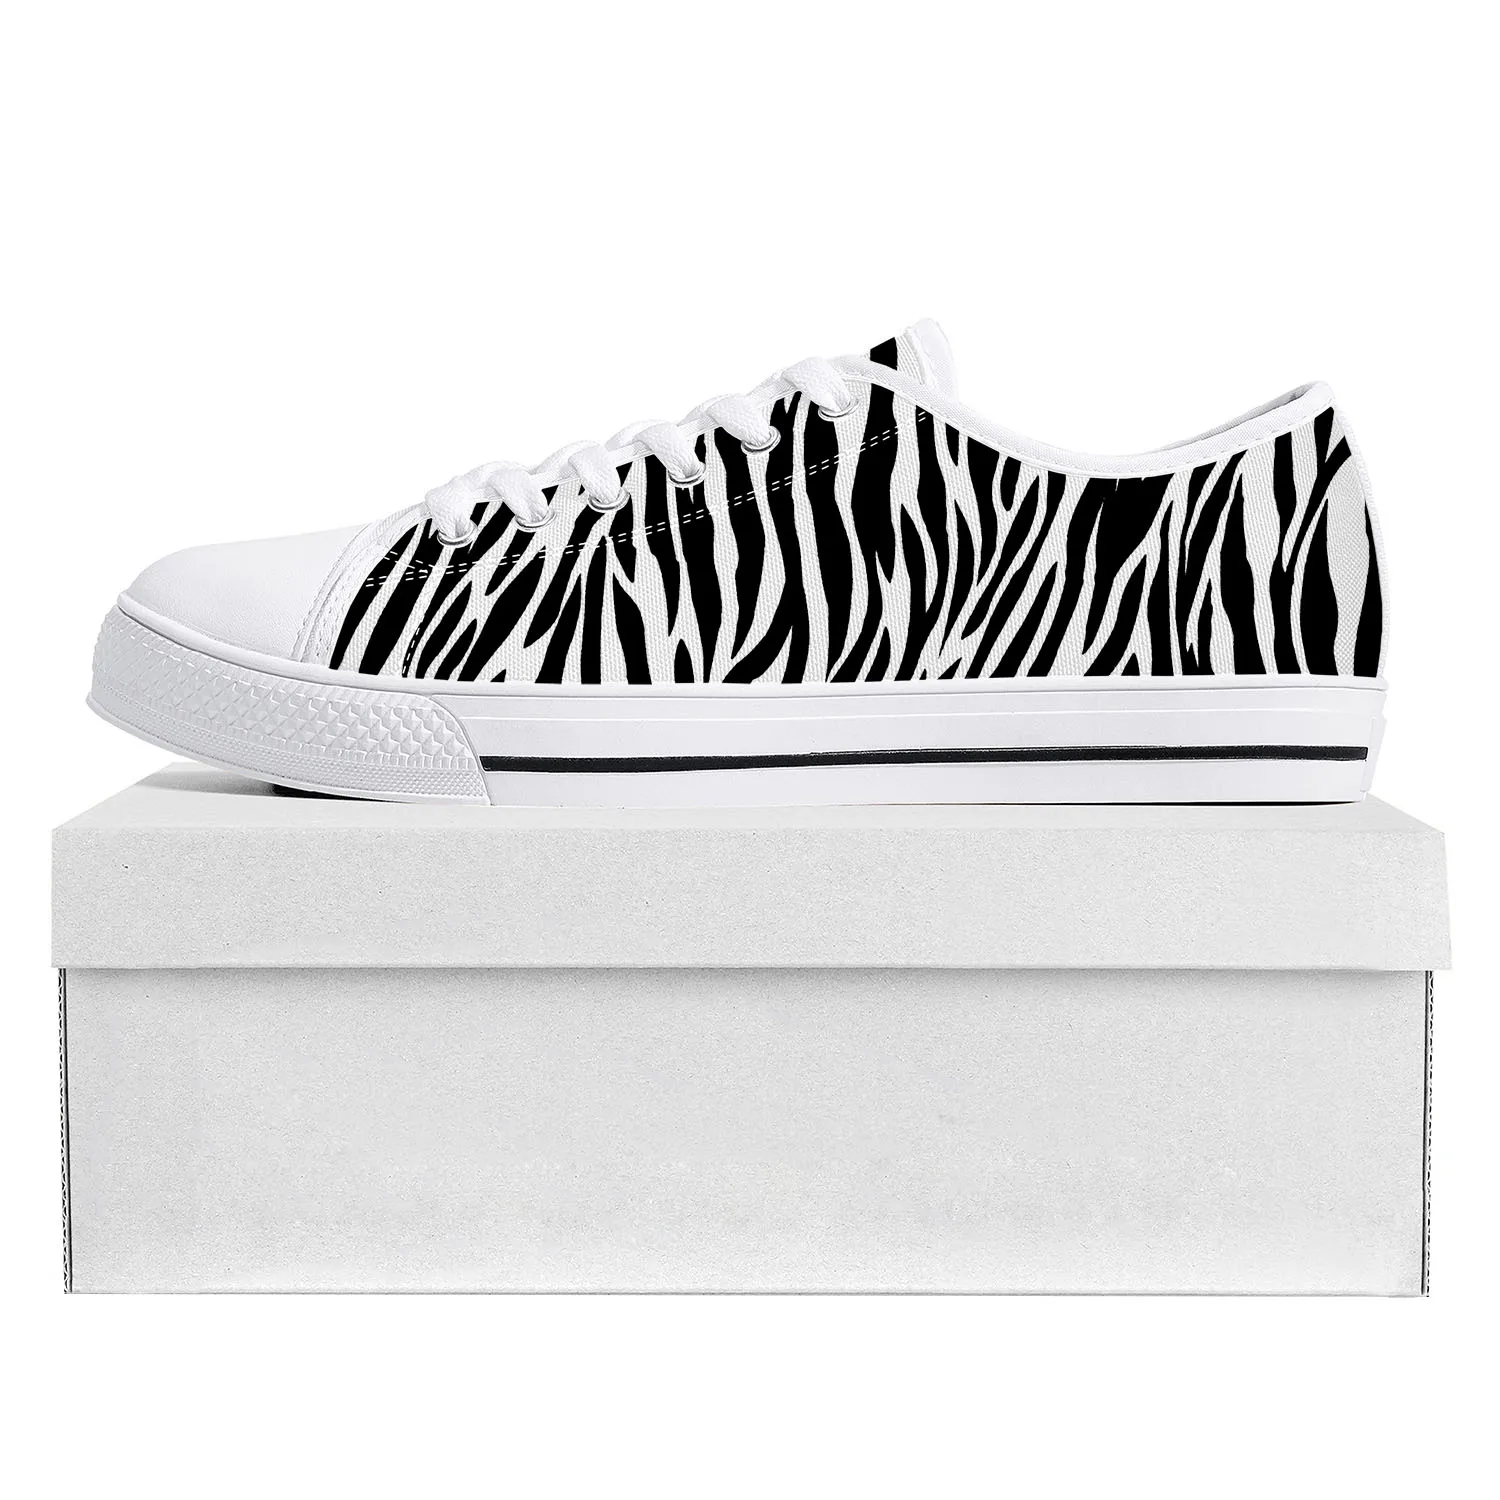 

Zebra Print 3D Fashion Low Top High Quality Sneakers Mens Womens Teenager Canvas Sneaker Tide Printed Causal Couple Custom Shoe